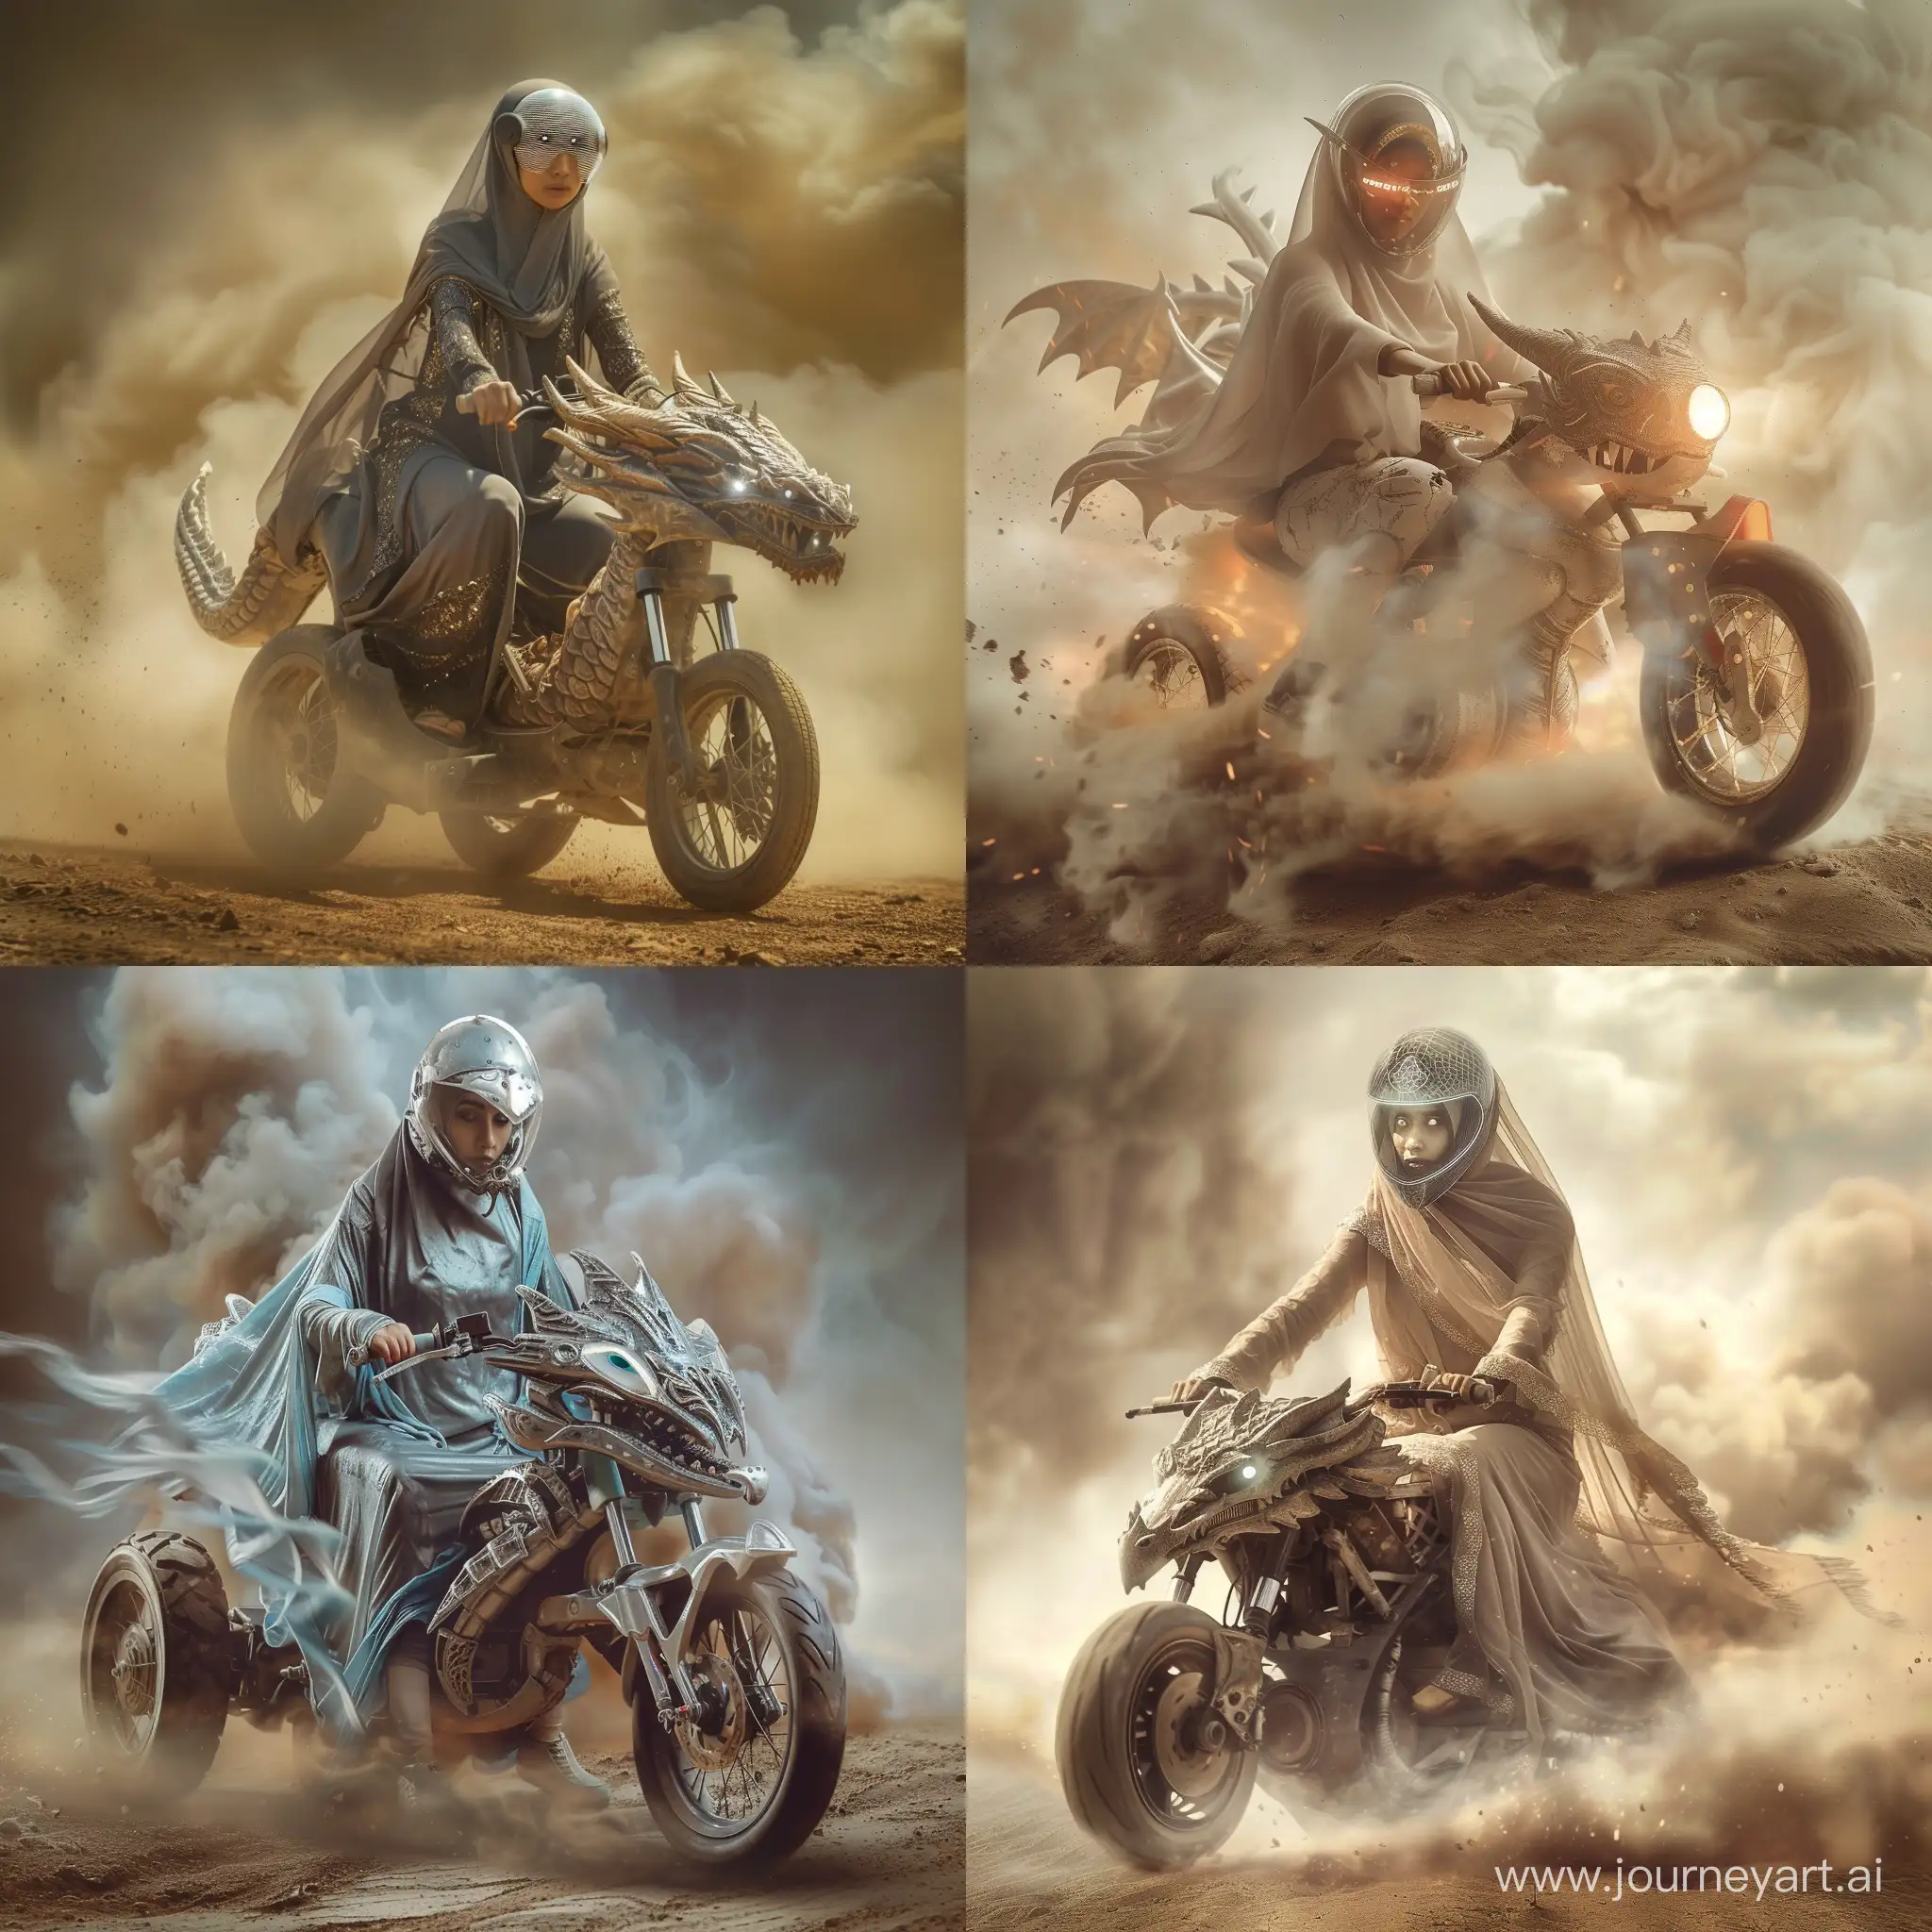 Muslimah-Riding-Dragon-Tricycle-Motorbike-with-AI-Robot-Companion